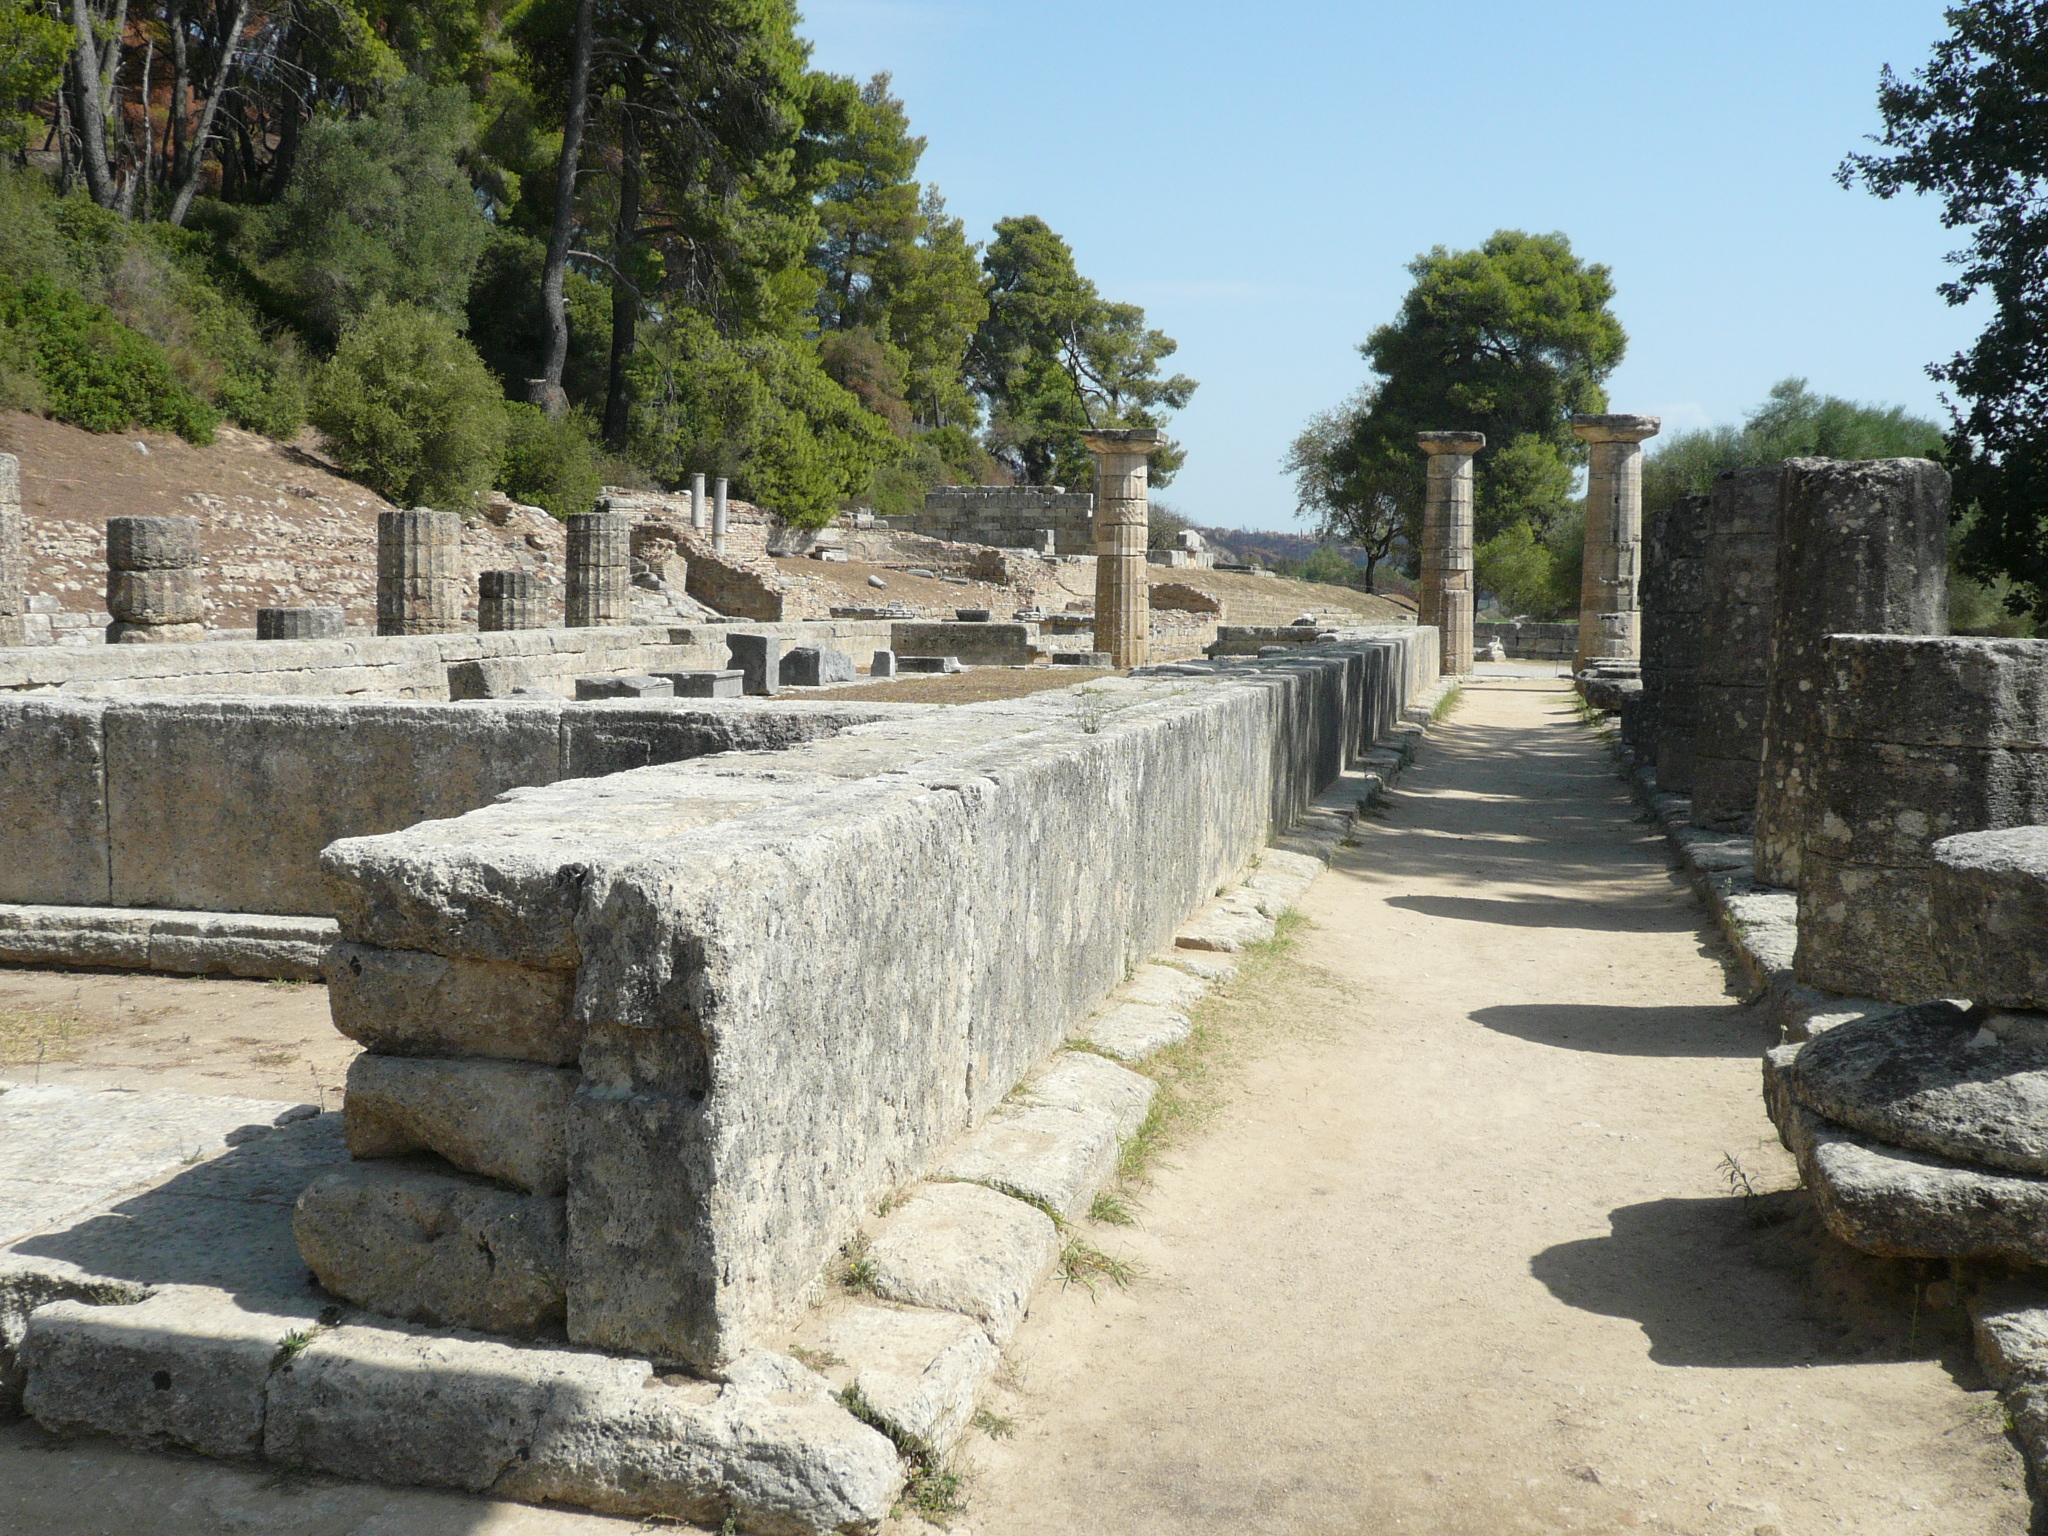 The Archaeological Site of Olympia in Greece, now under threat from approaching wildfires